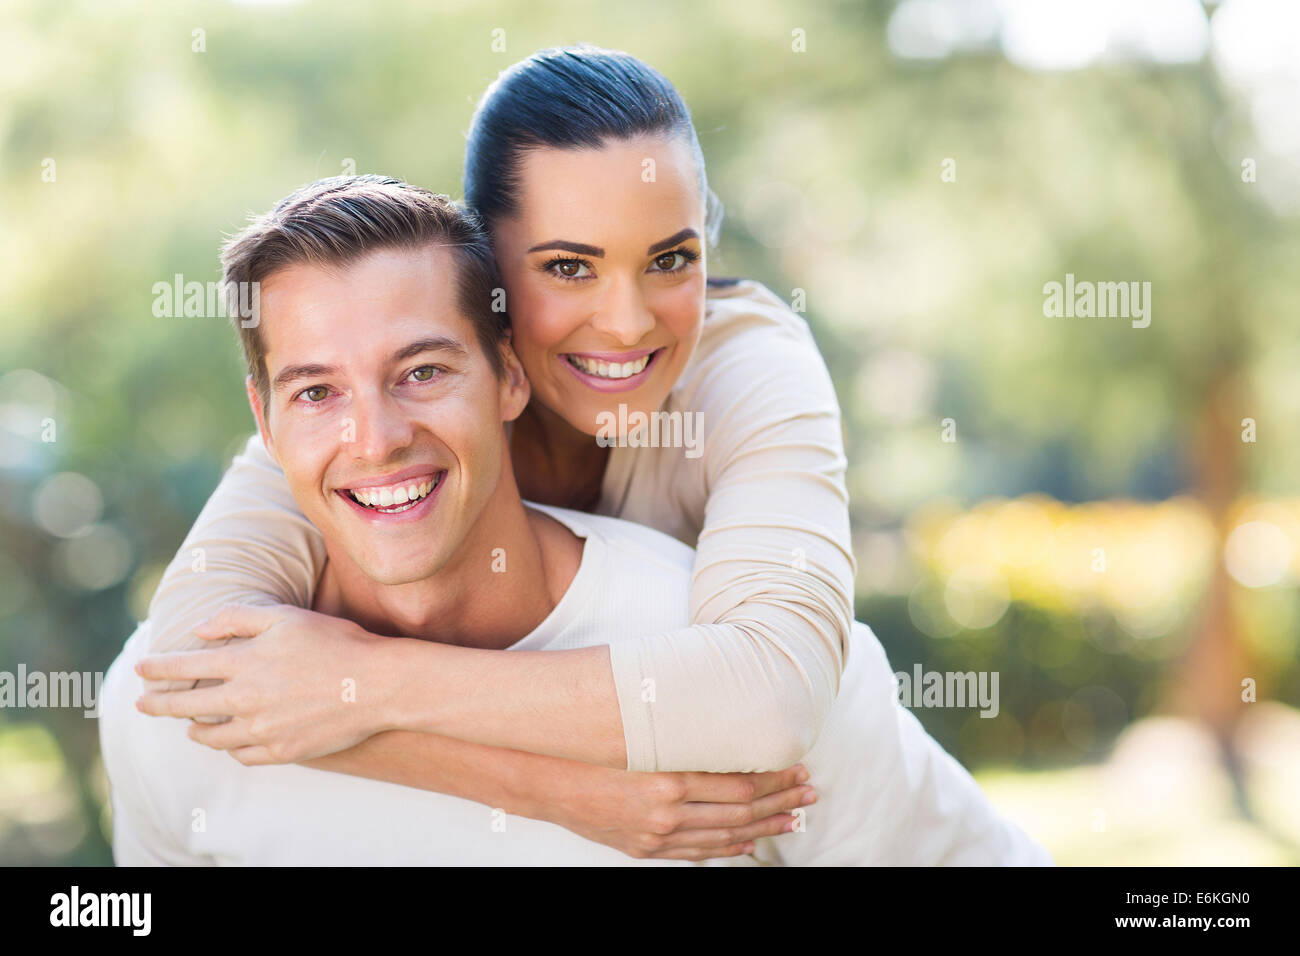 attractive young couple piggybacking outdoors Stock Photo